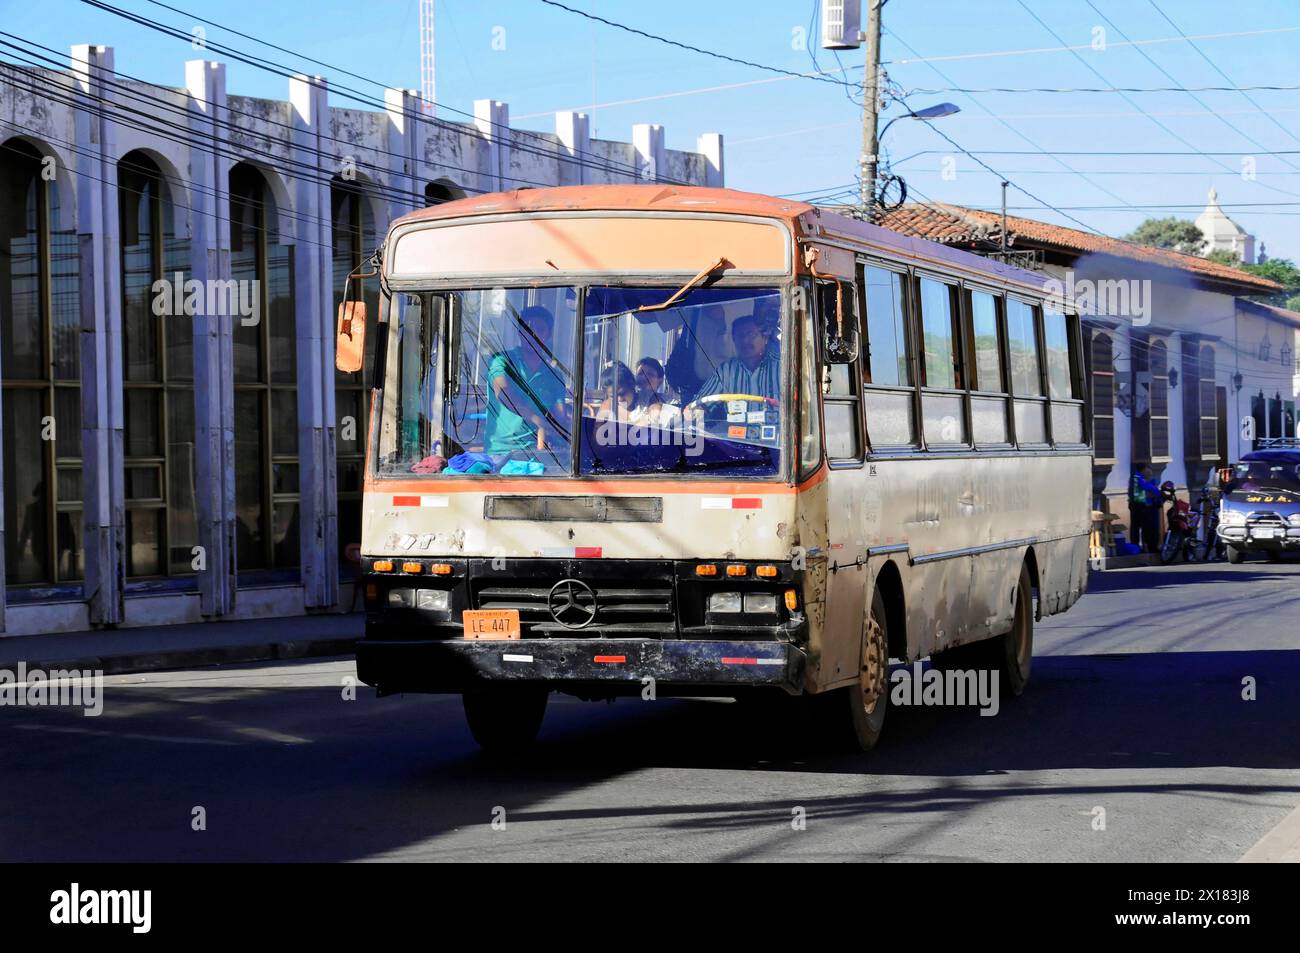 Leon Nicaragua, Old bus on a city street with visible buildings in the background, Nicaragua, Central America, Central America Stock Photo